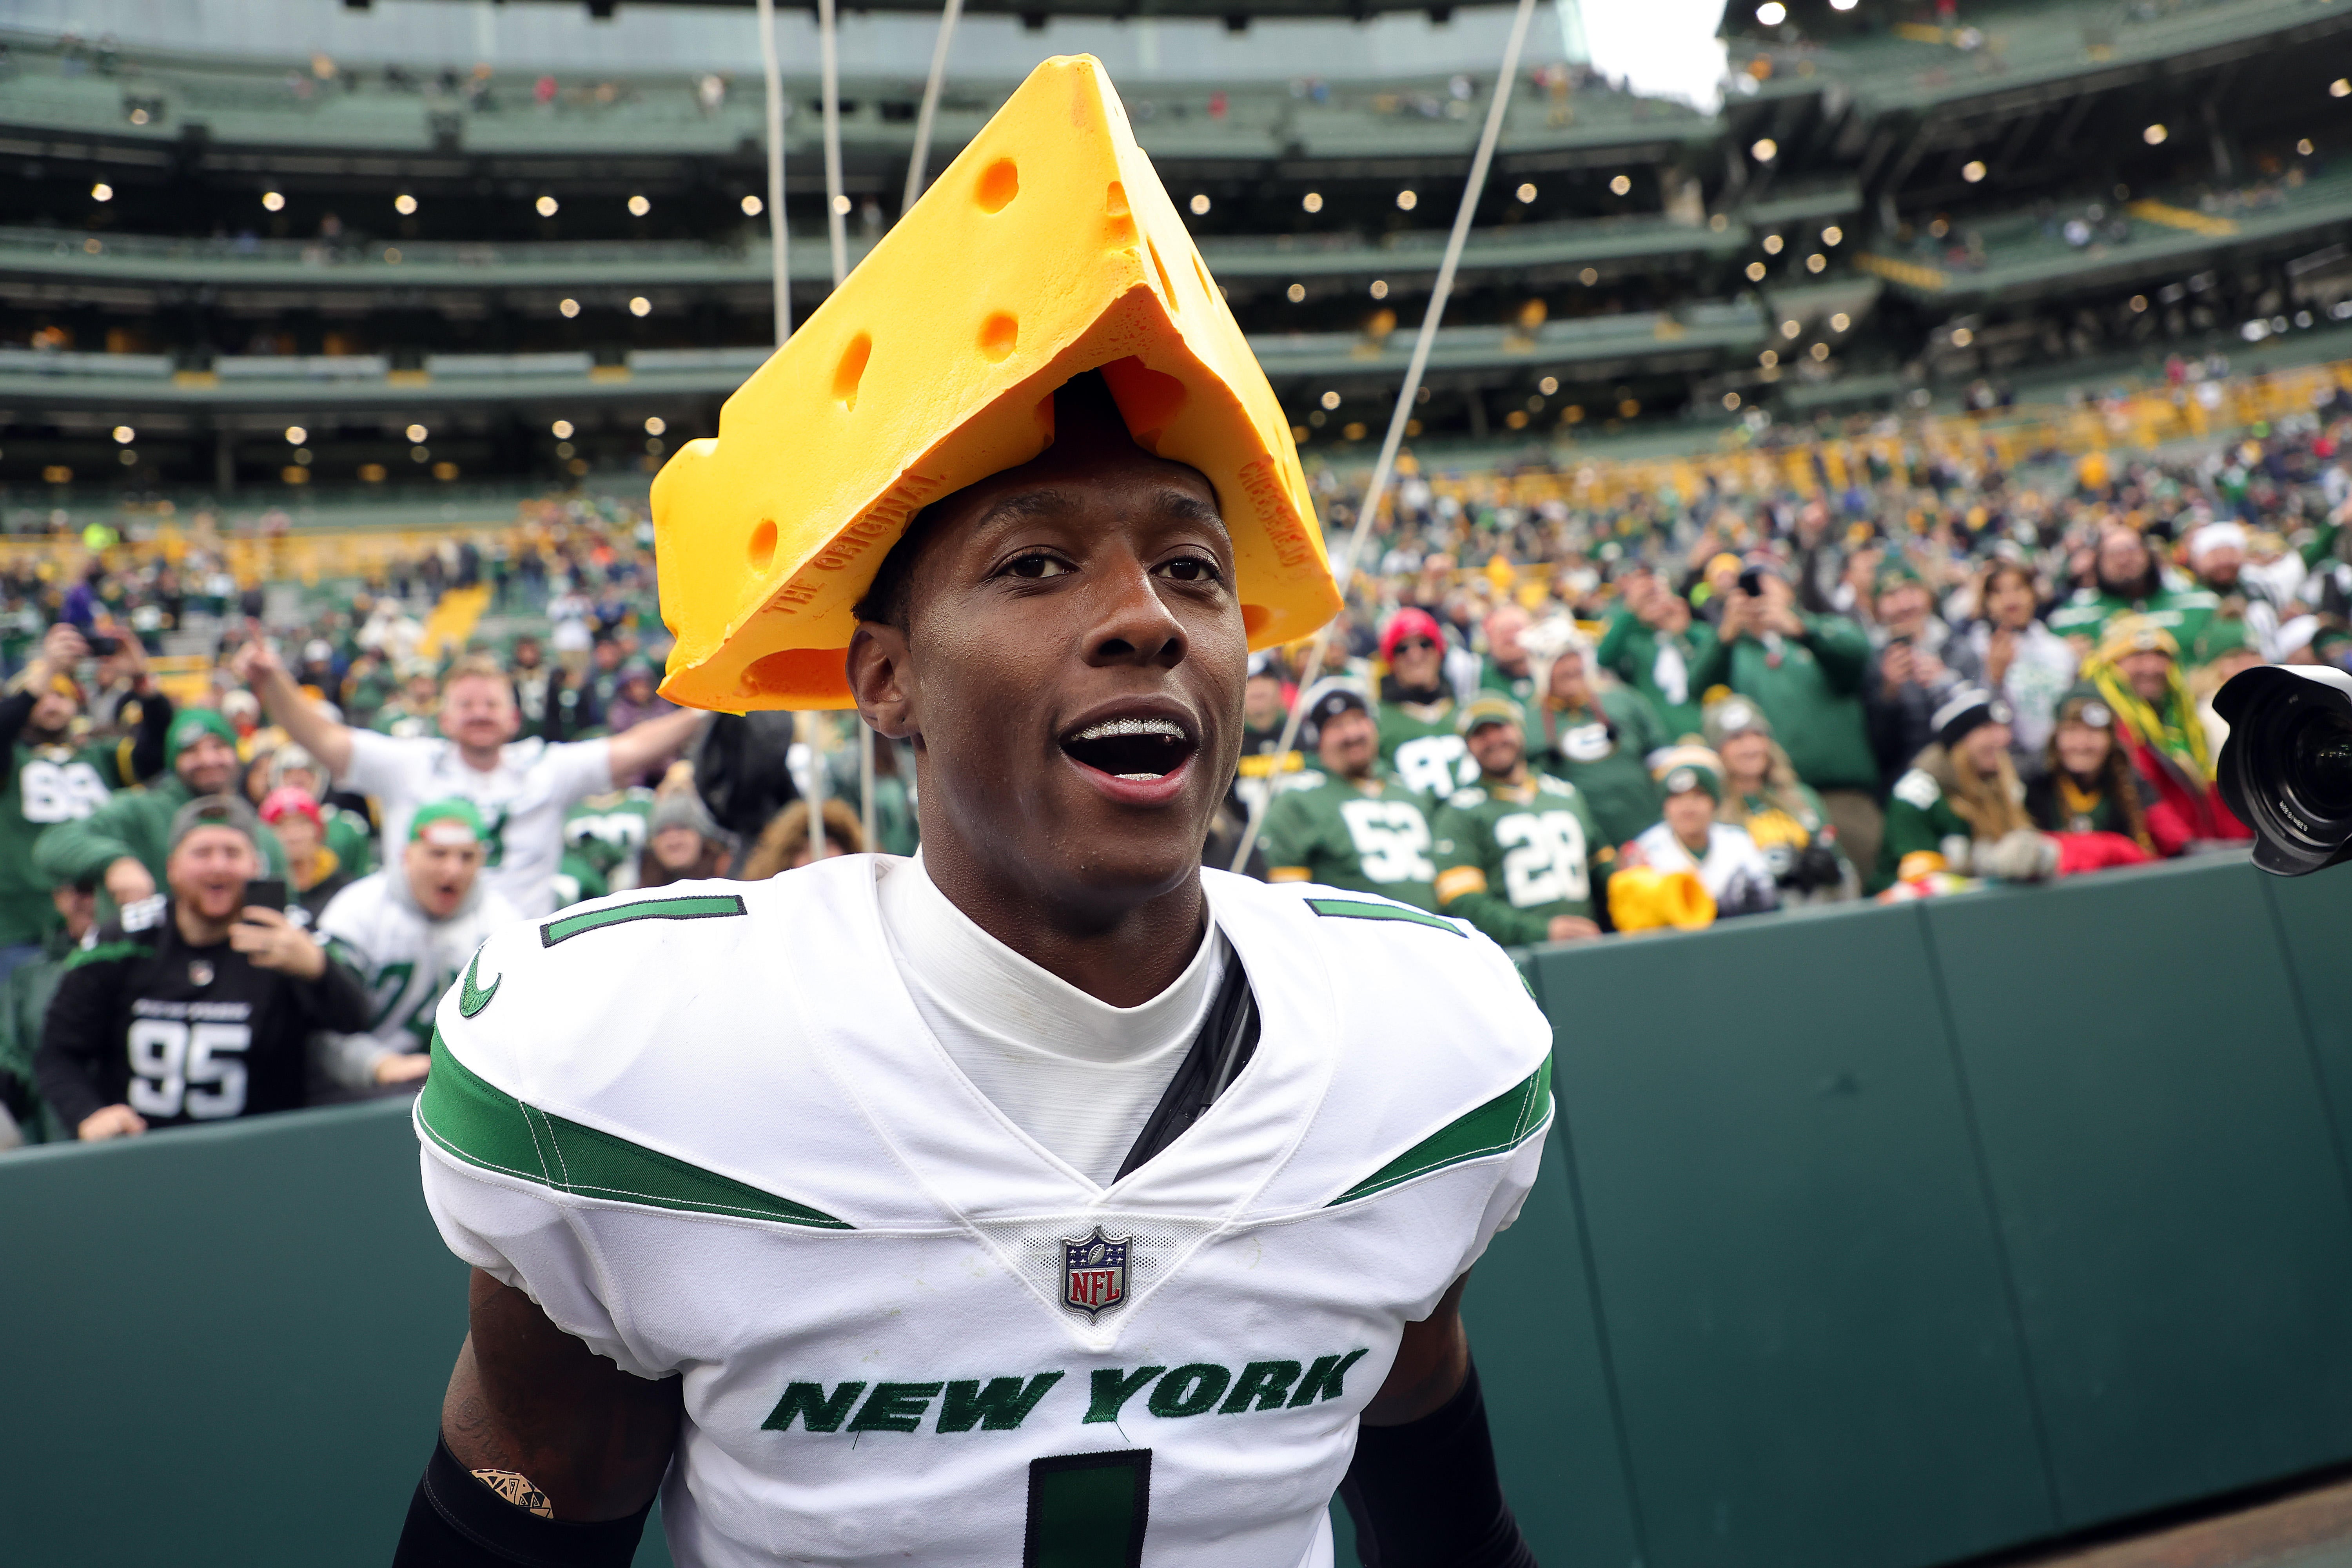 Jets' Sauce Gardner wears cheesehead at Lambeau Field to celebrate upset win against Packers